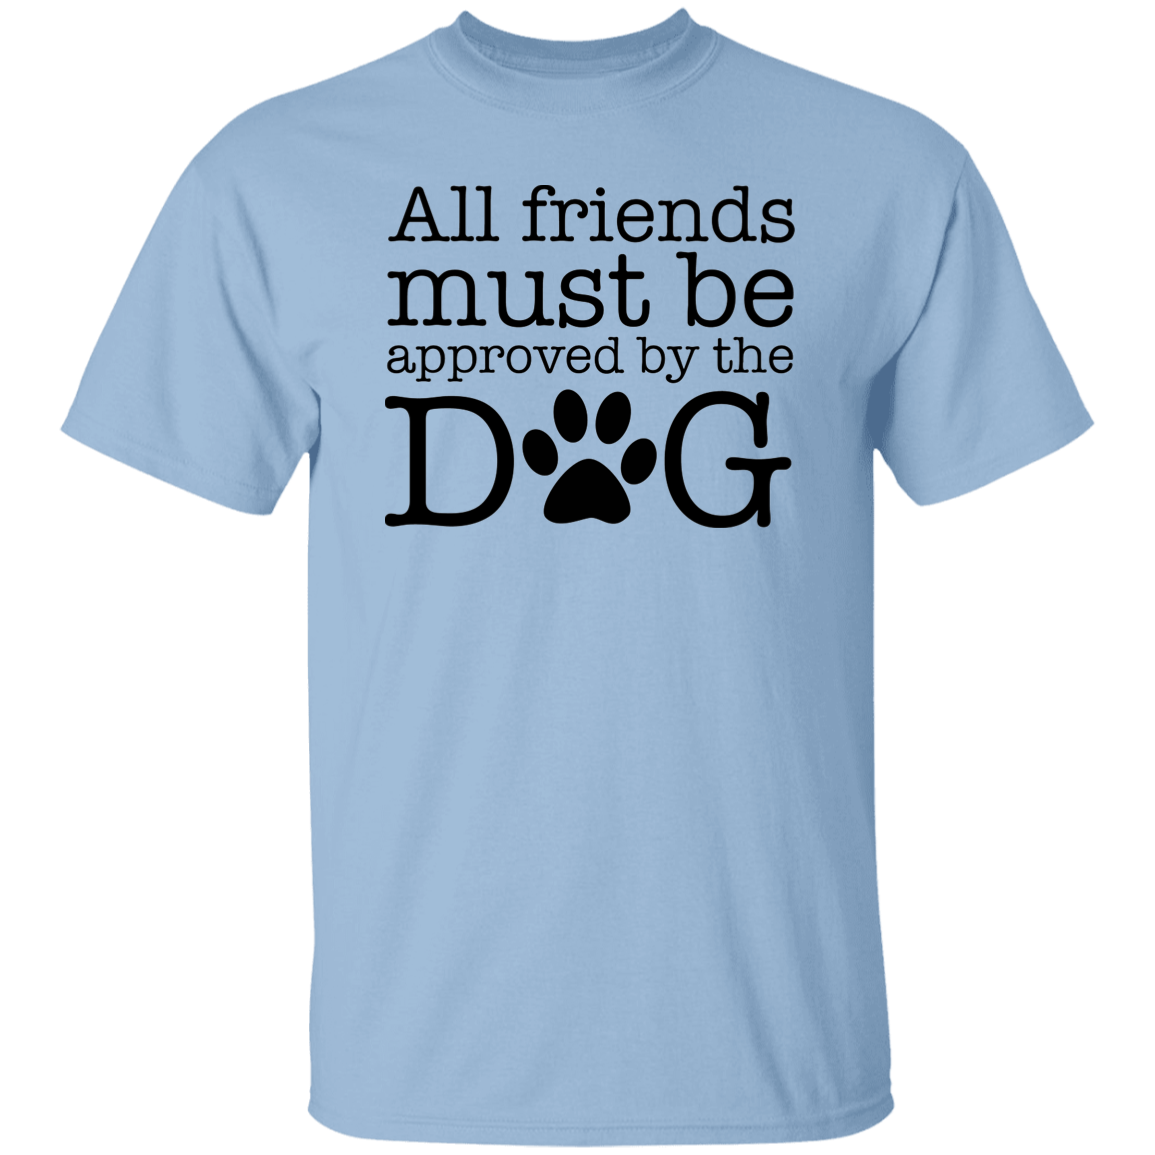 All My Friends Must Be Approved by the Dog T-Shirt